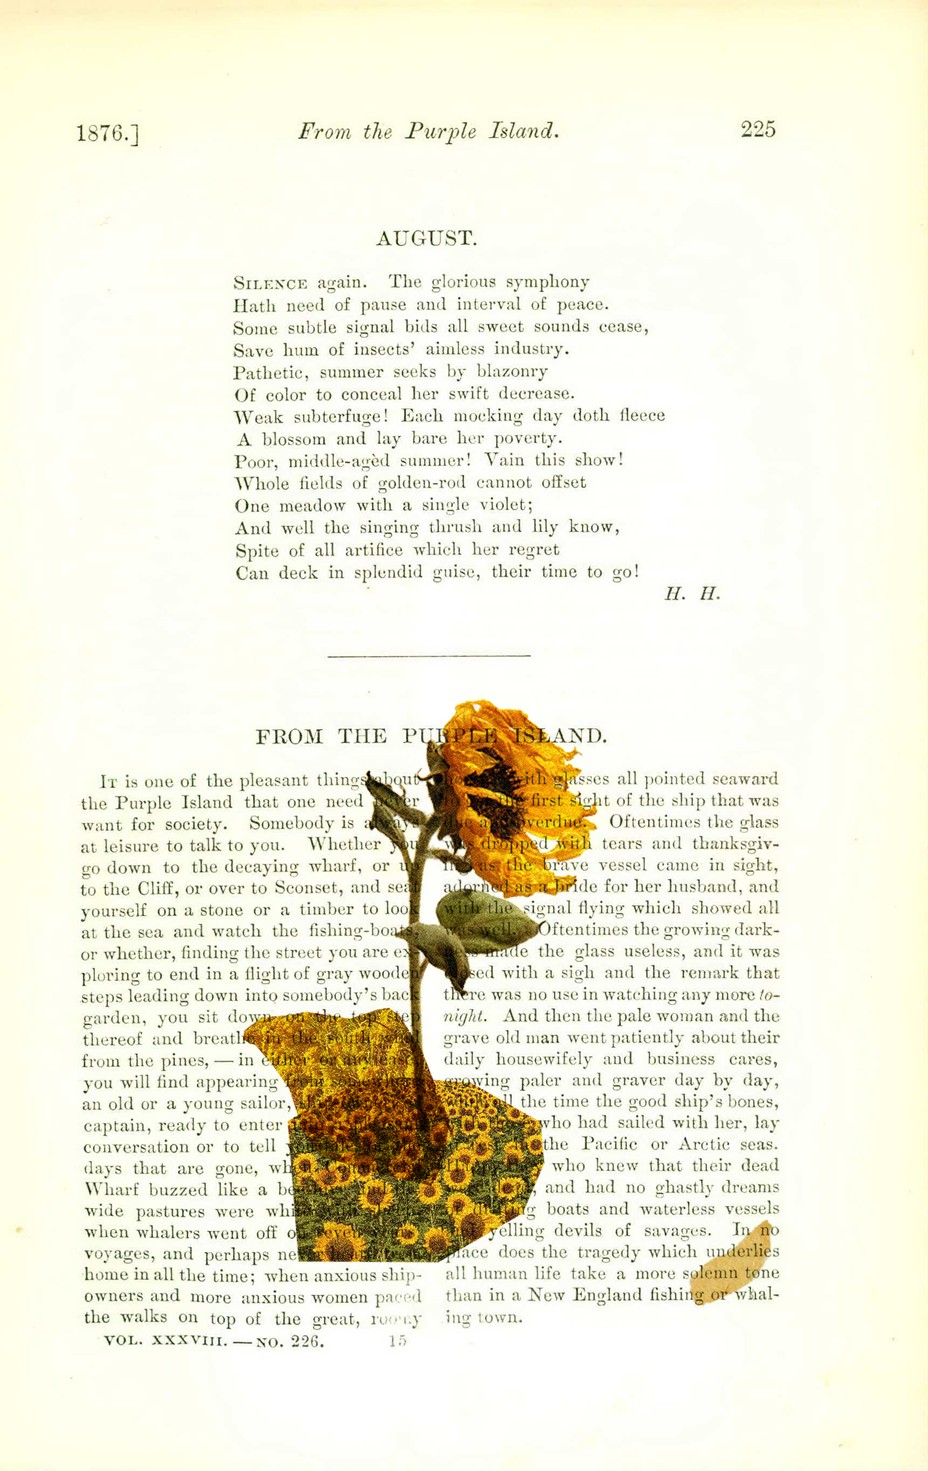 The original magazine page, with photos of sunflowers collaged on